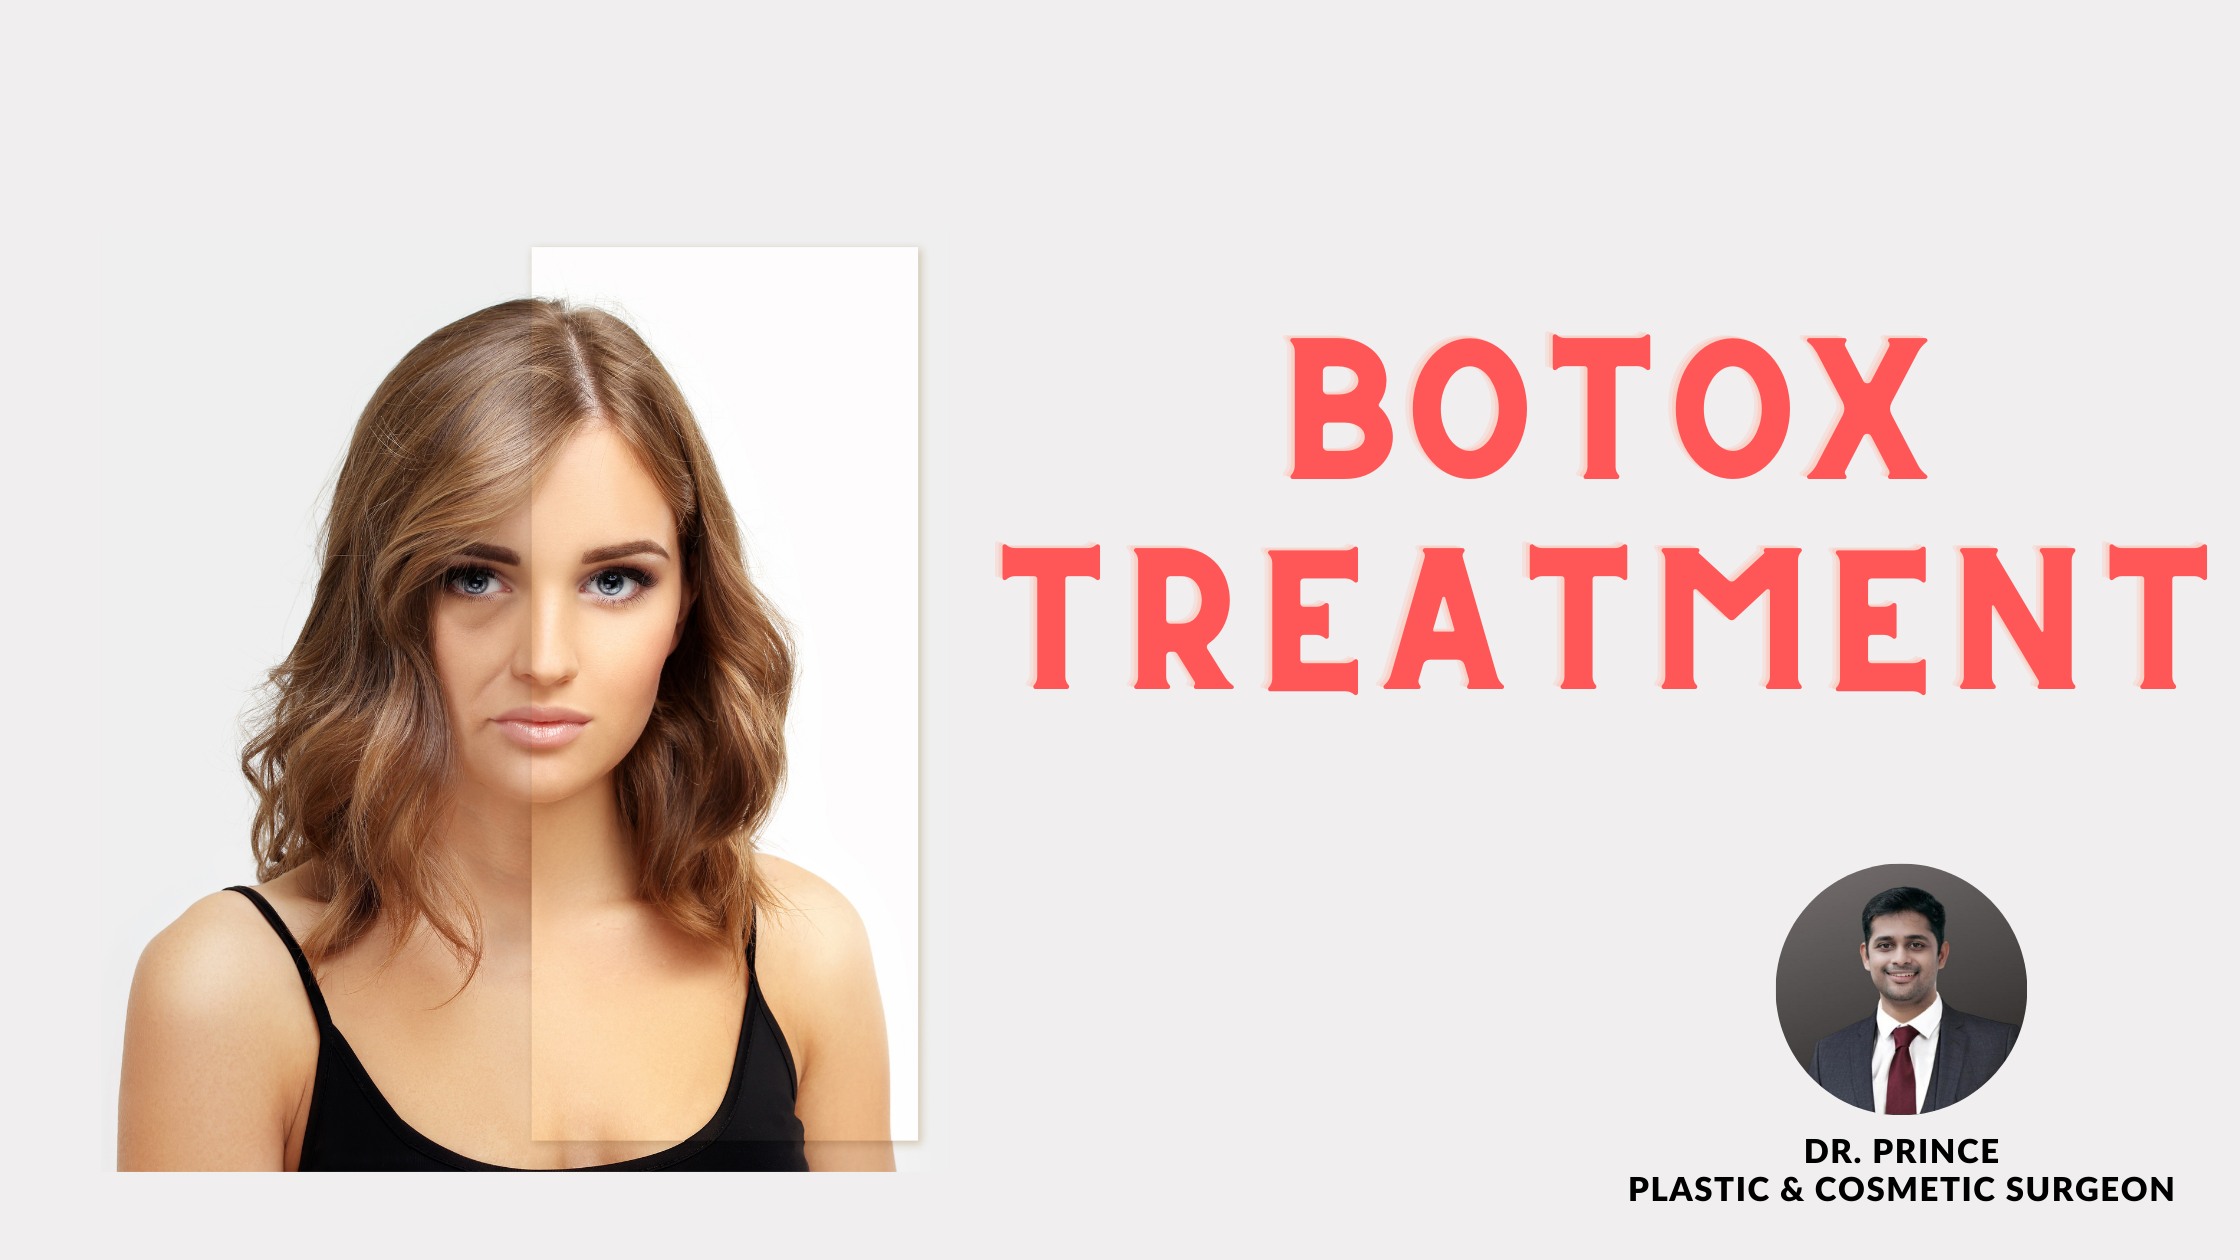 Image: A close-up view illustrating the transformative effects of Botox treatment by Dr. Prince. Smoothed facial lines and a refreshed appearance, showcasing the artful touch of aesthetic enhancement.